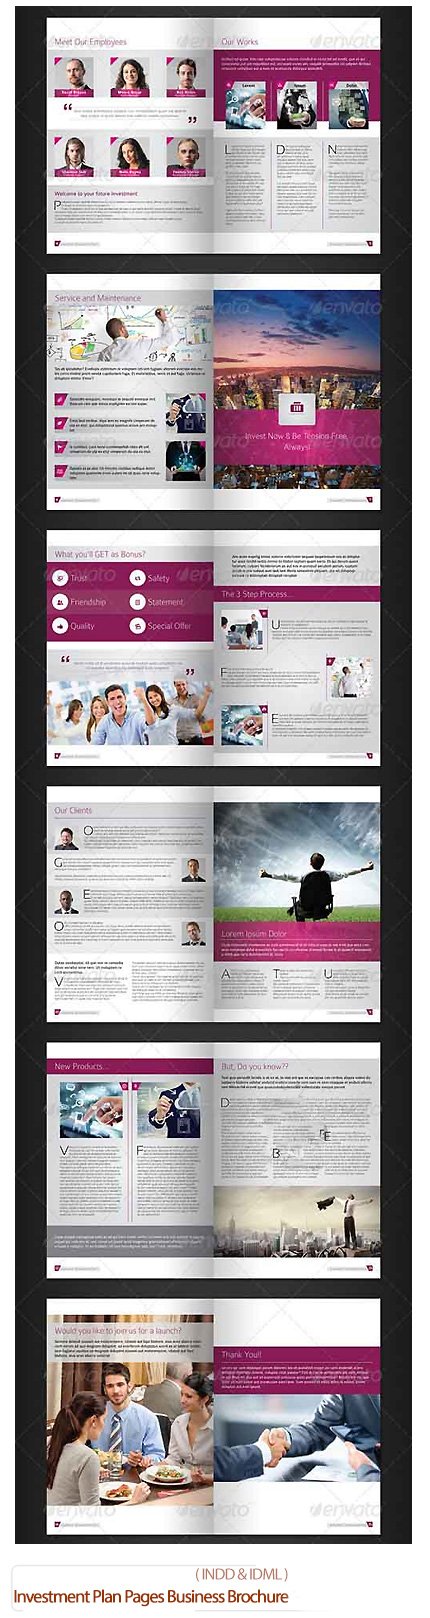 Investment Plan 16 Pages Business Brochure